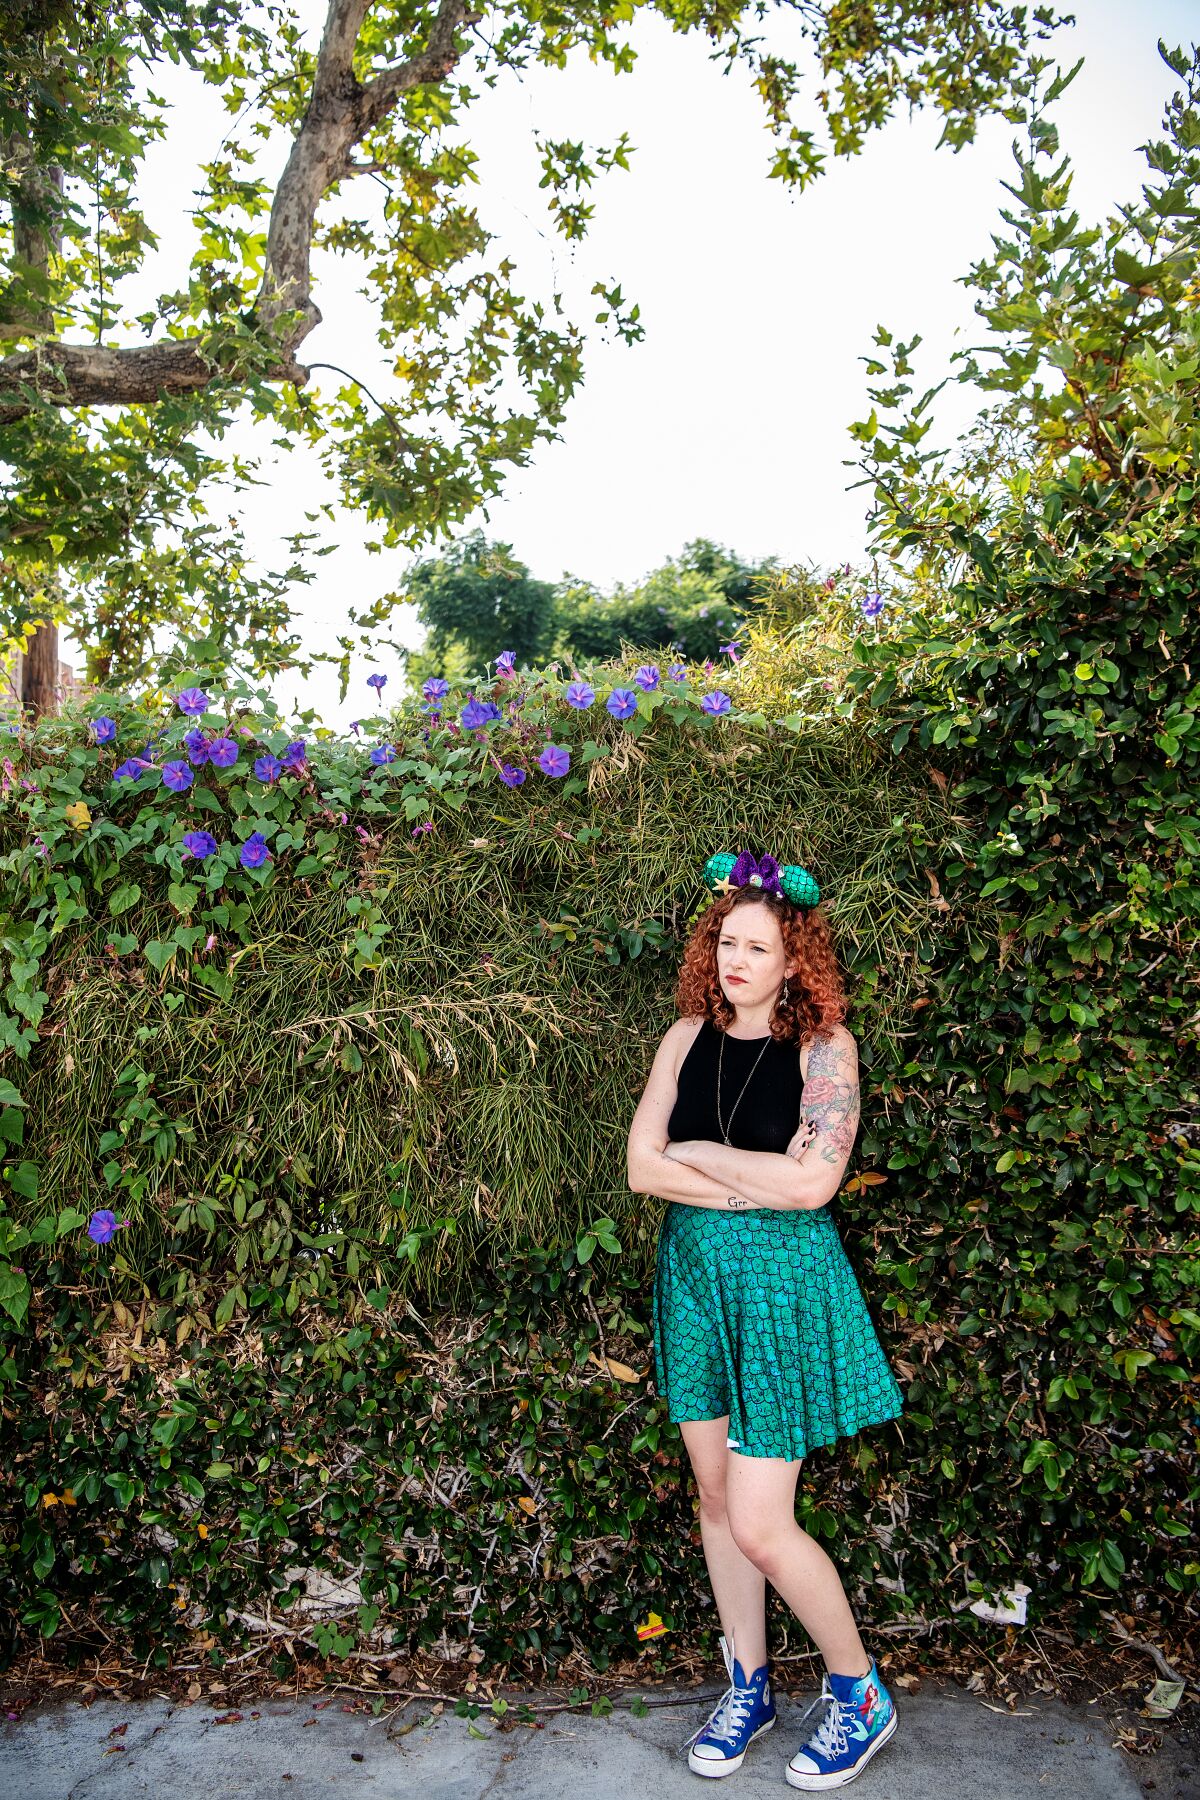 Dressed in Ariel-inspired attire, Stacey Major is feeling the loss of visiting Disneyland.